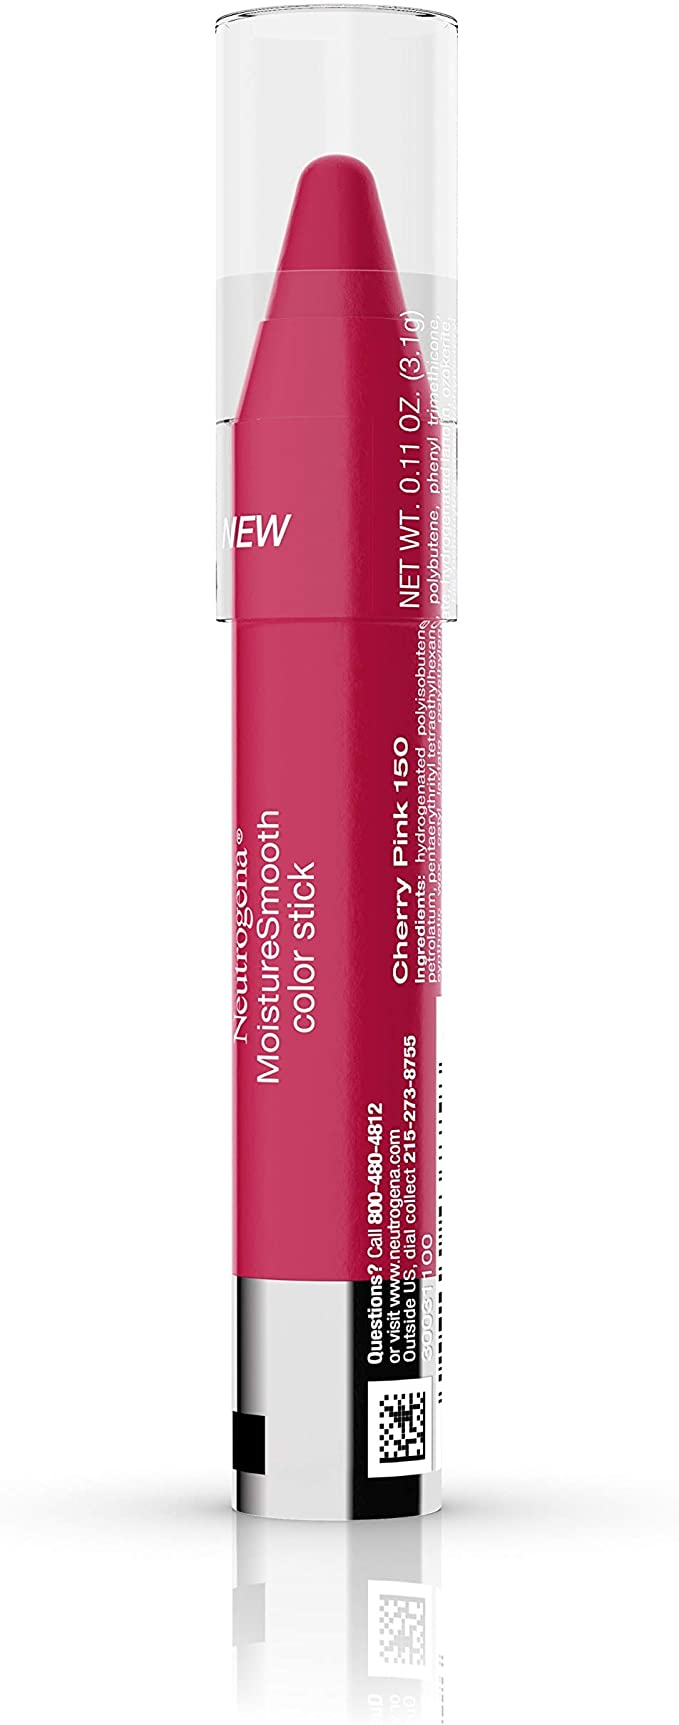 Neutrogena Moisture Smooth Color Stick for Lips, Moisturizing and Conditioning Lipstick with a Balm-Like Formula, Nourishing Shea Butter and Fruit Extract